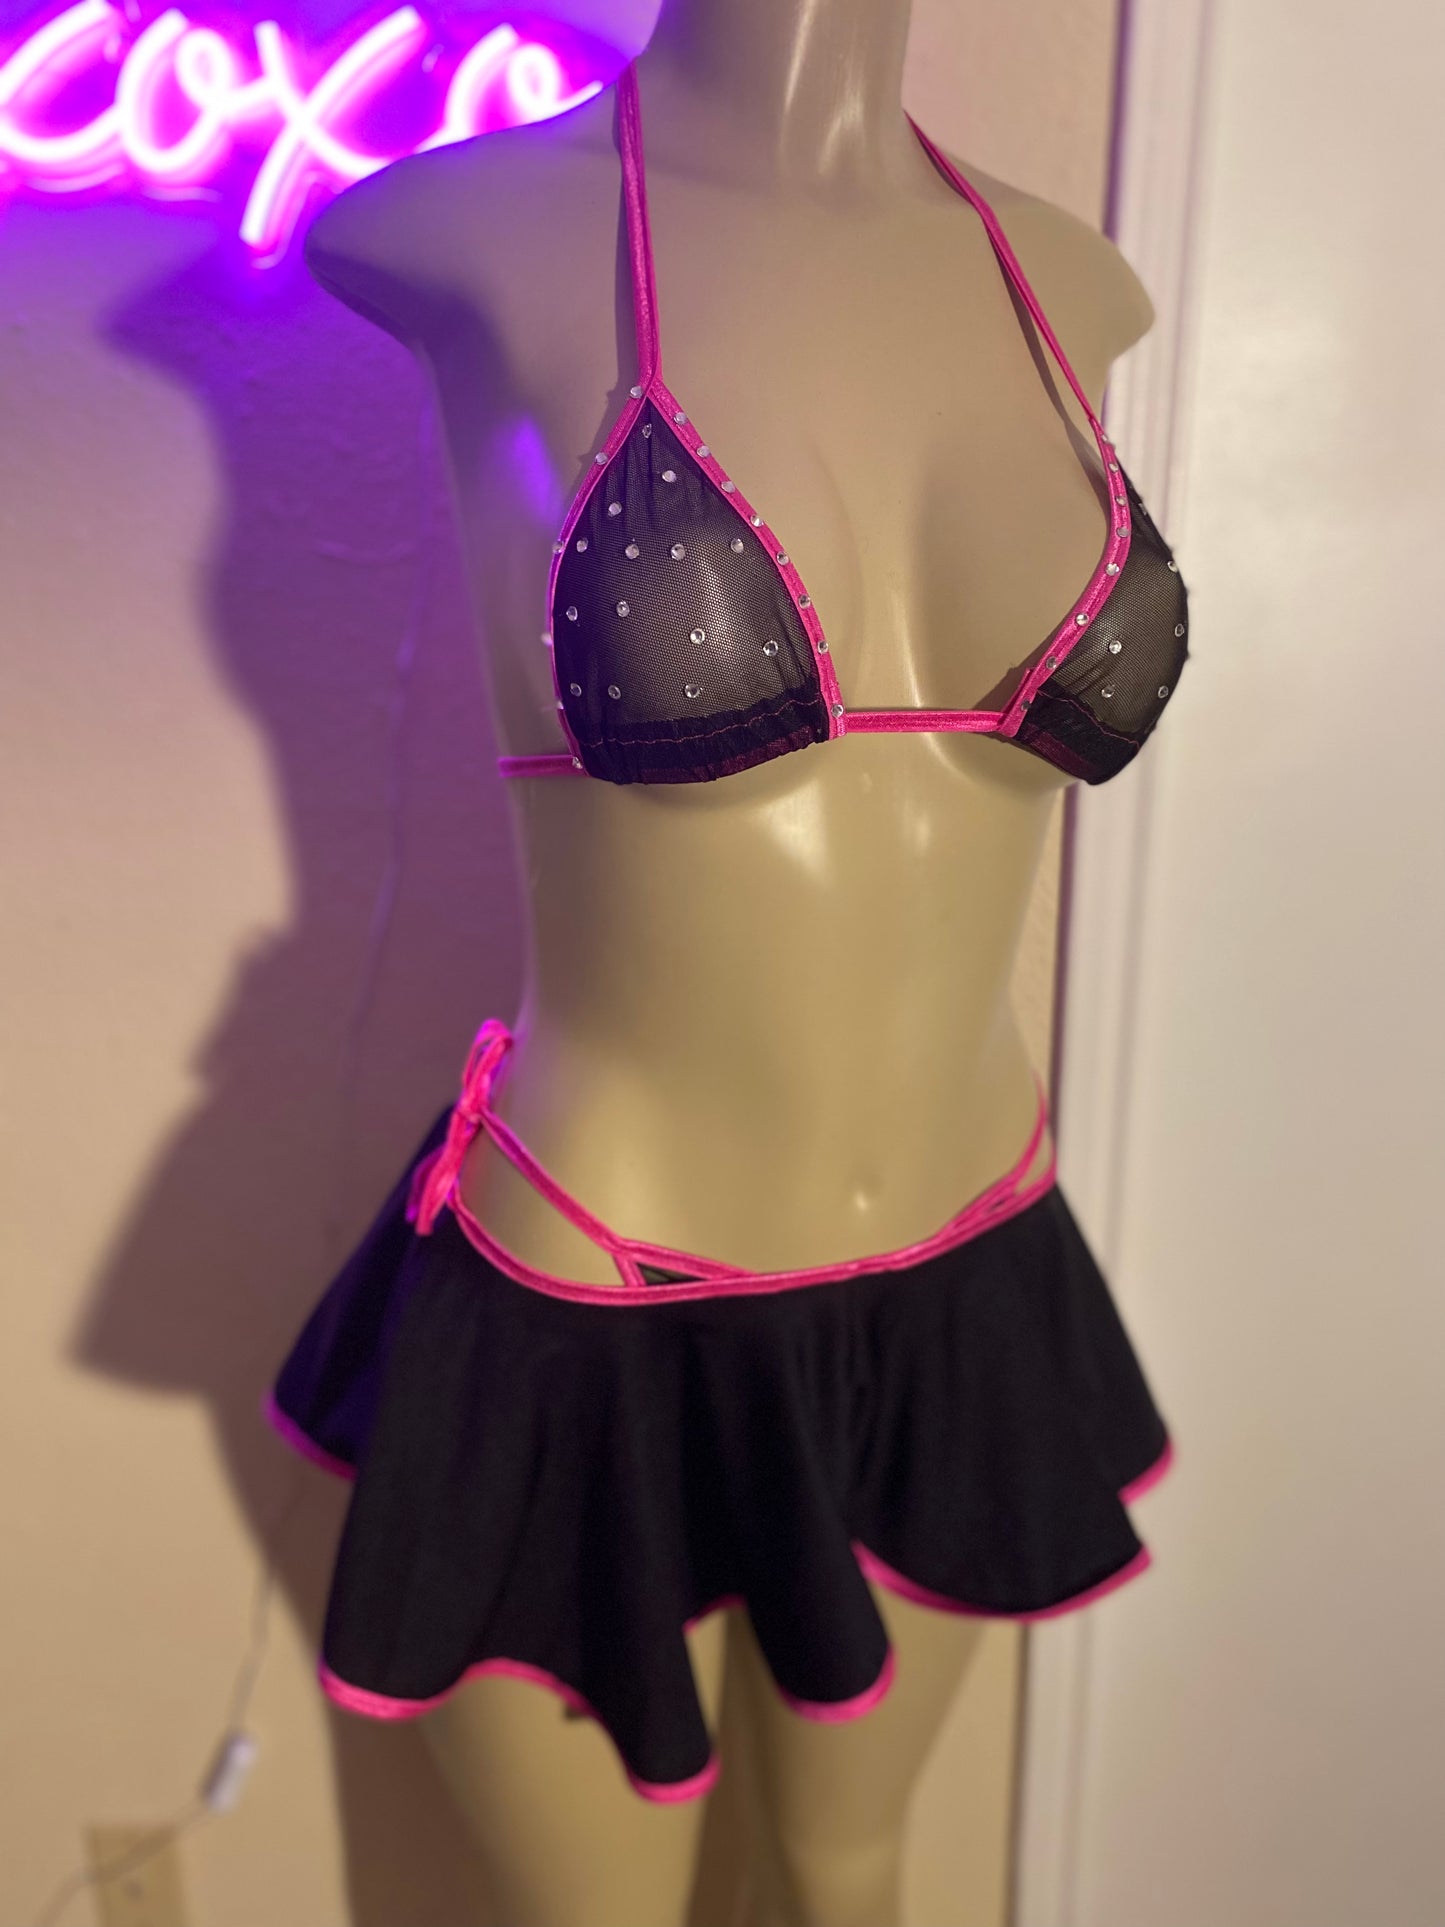 Mesh 3 piece lingerie with skirt